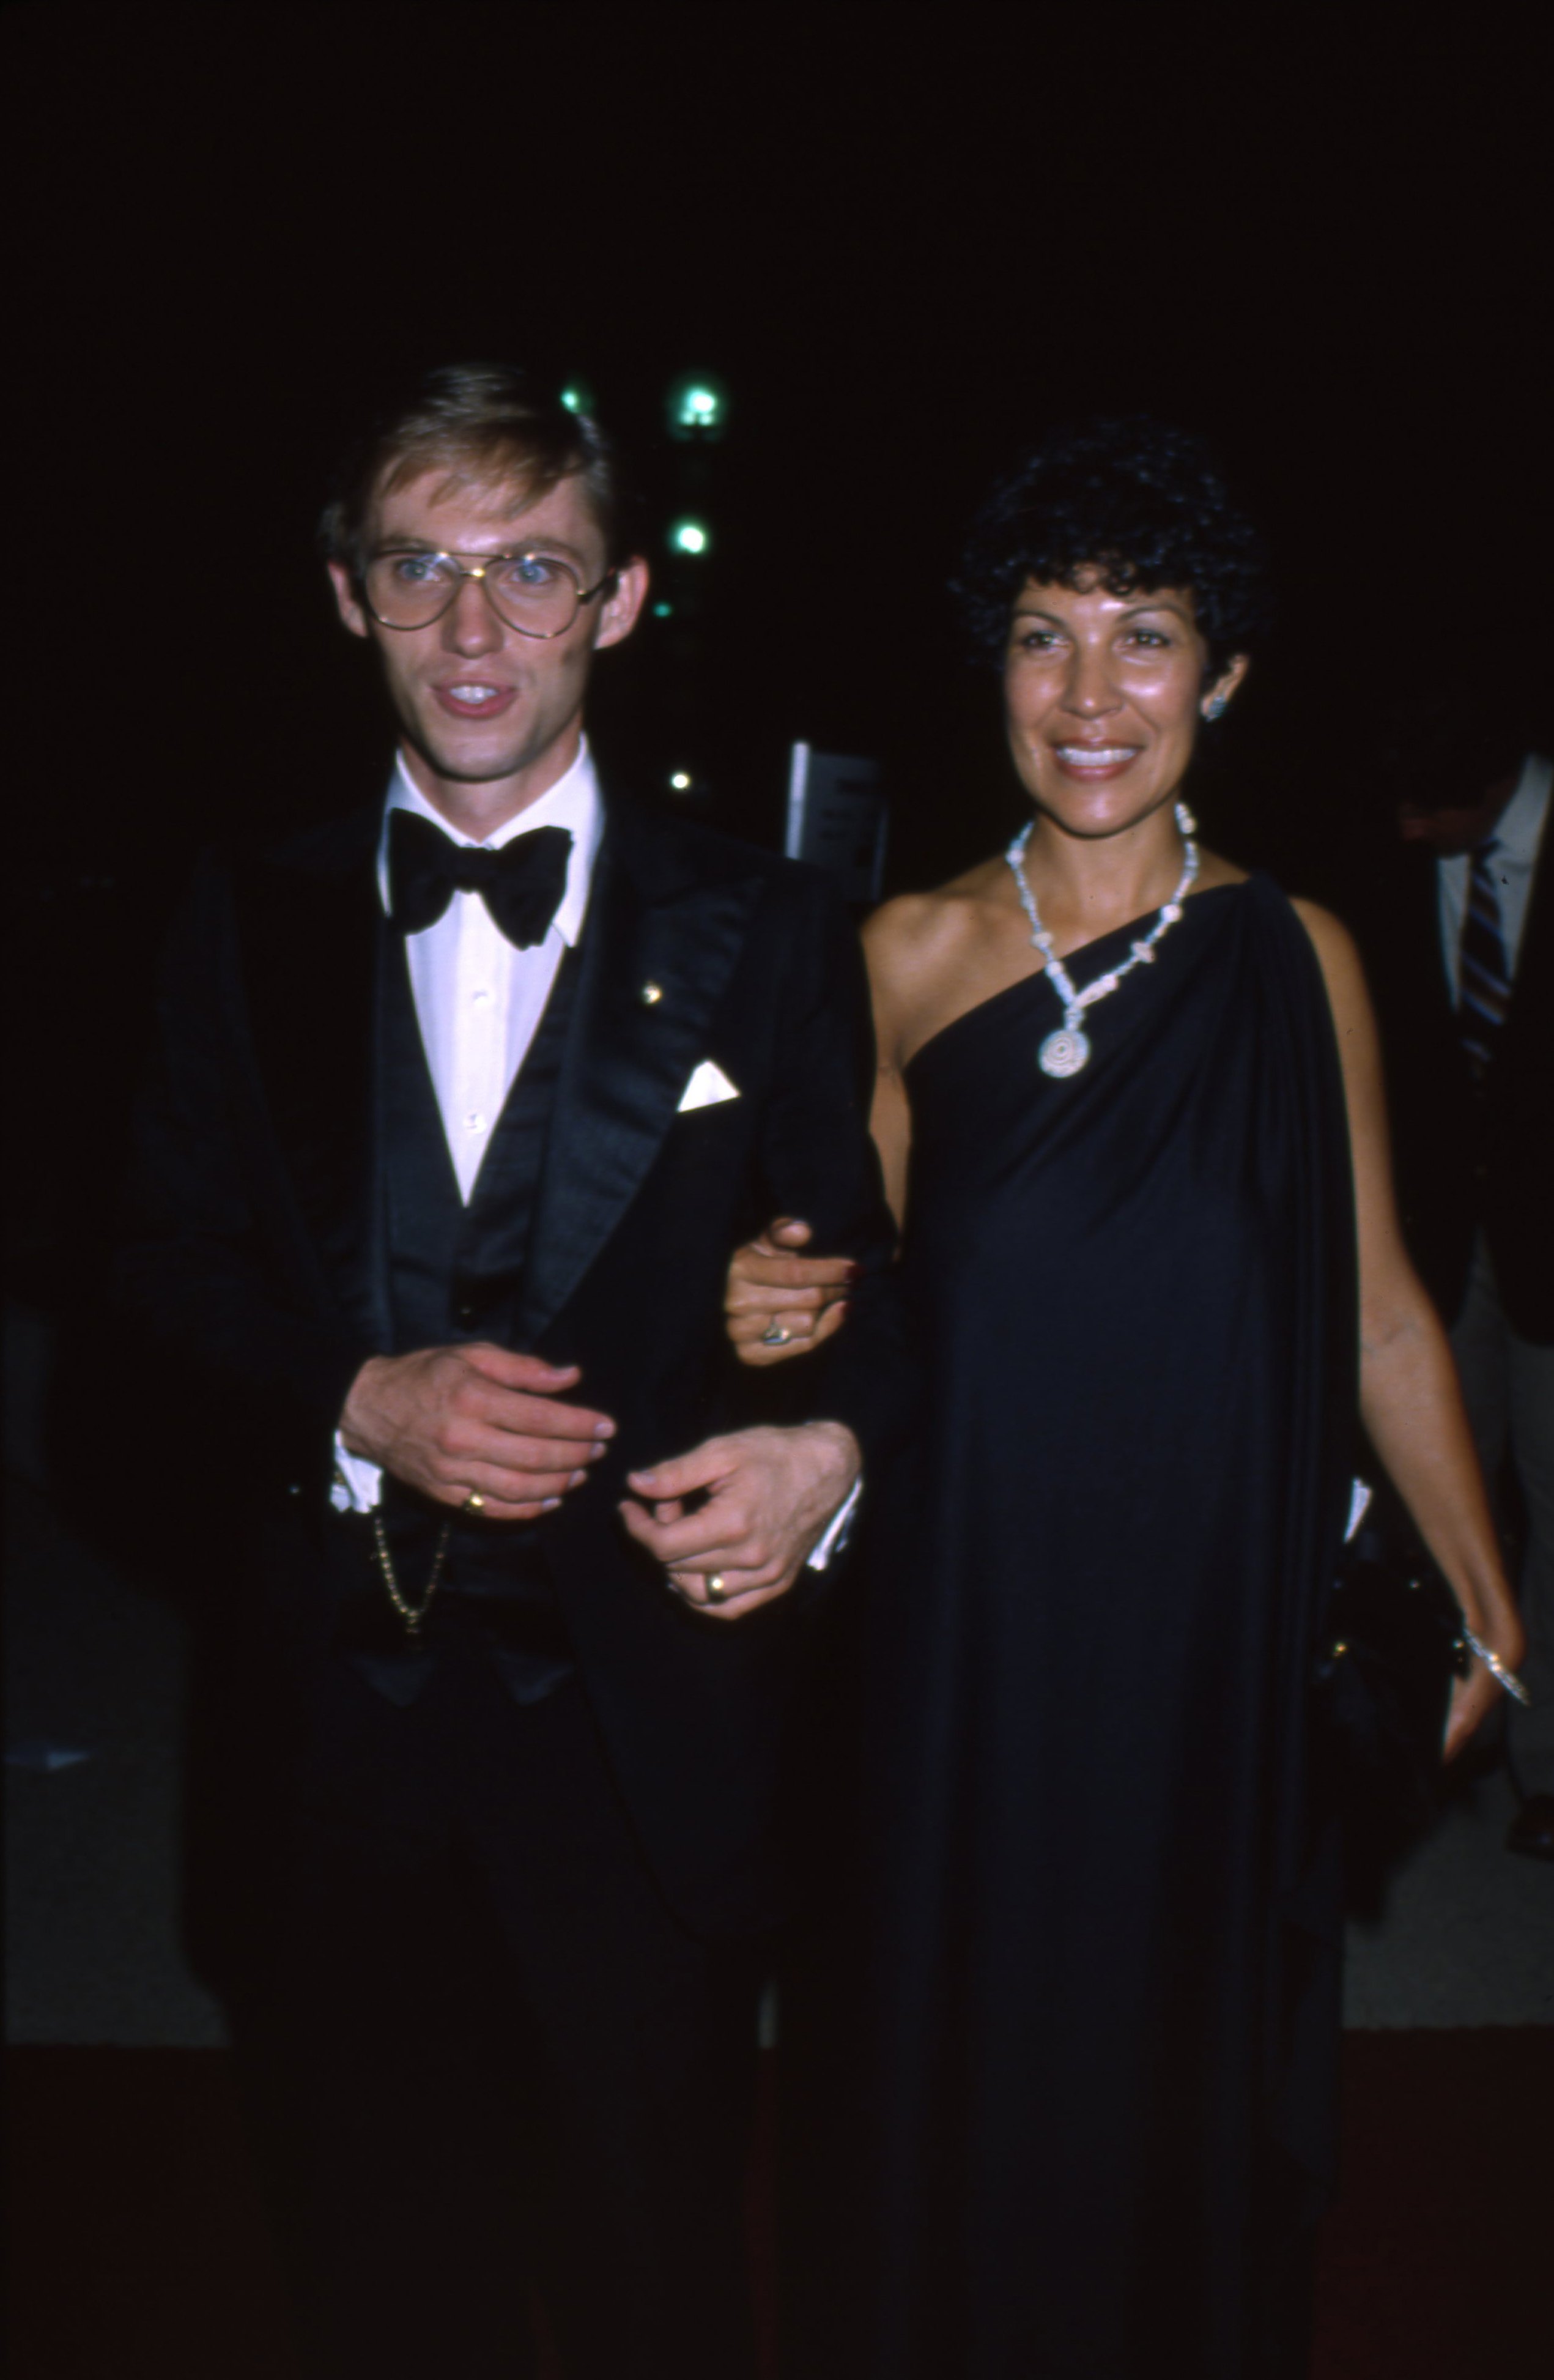 Richard Thomas and Alma Gonzales at an event in Los Angeles, California circa 1980. | Source: Getty Images